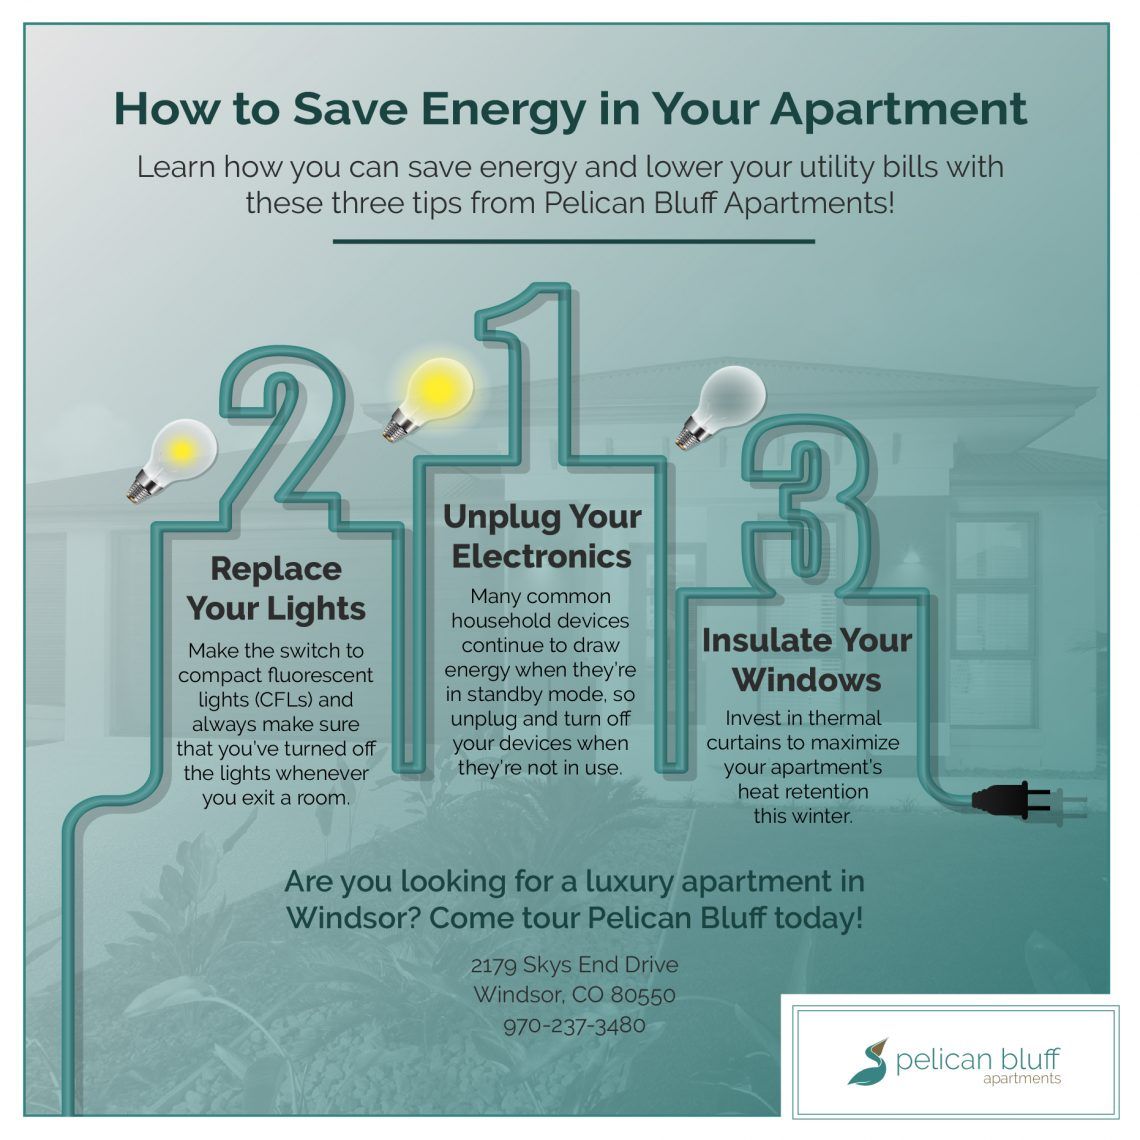 How to save energy in your apartment